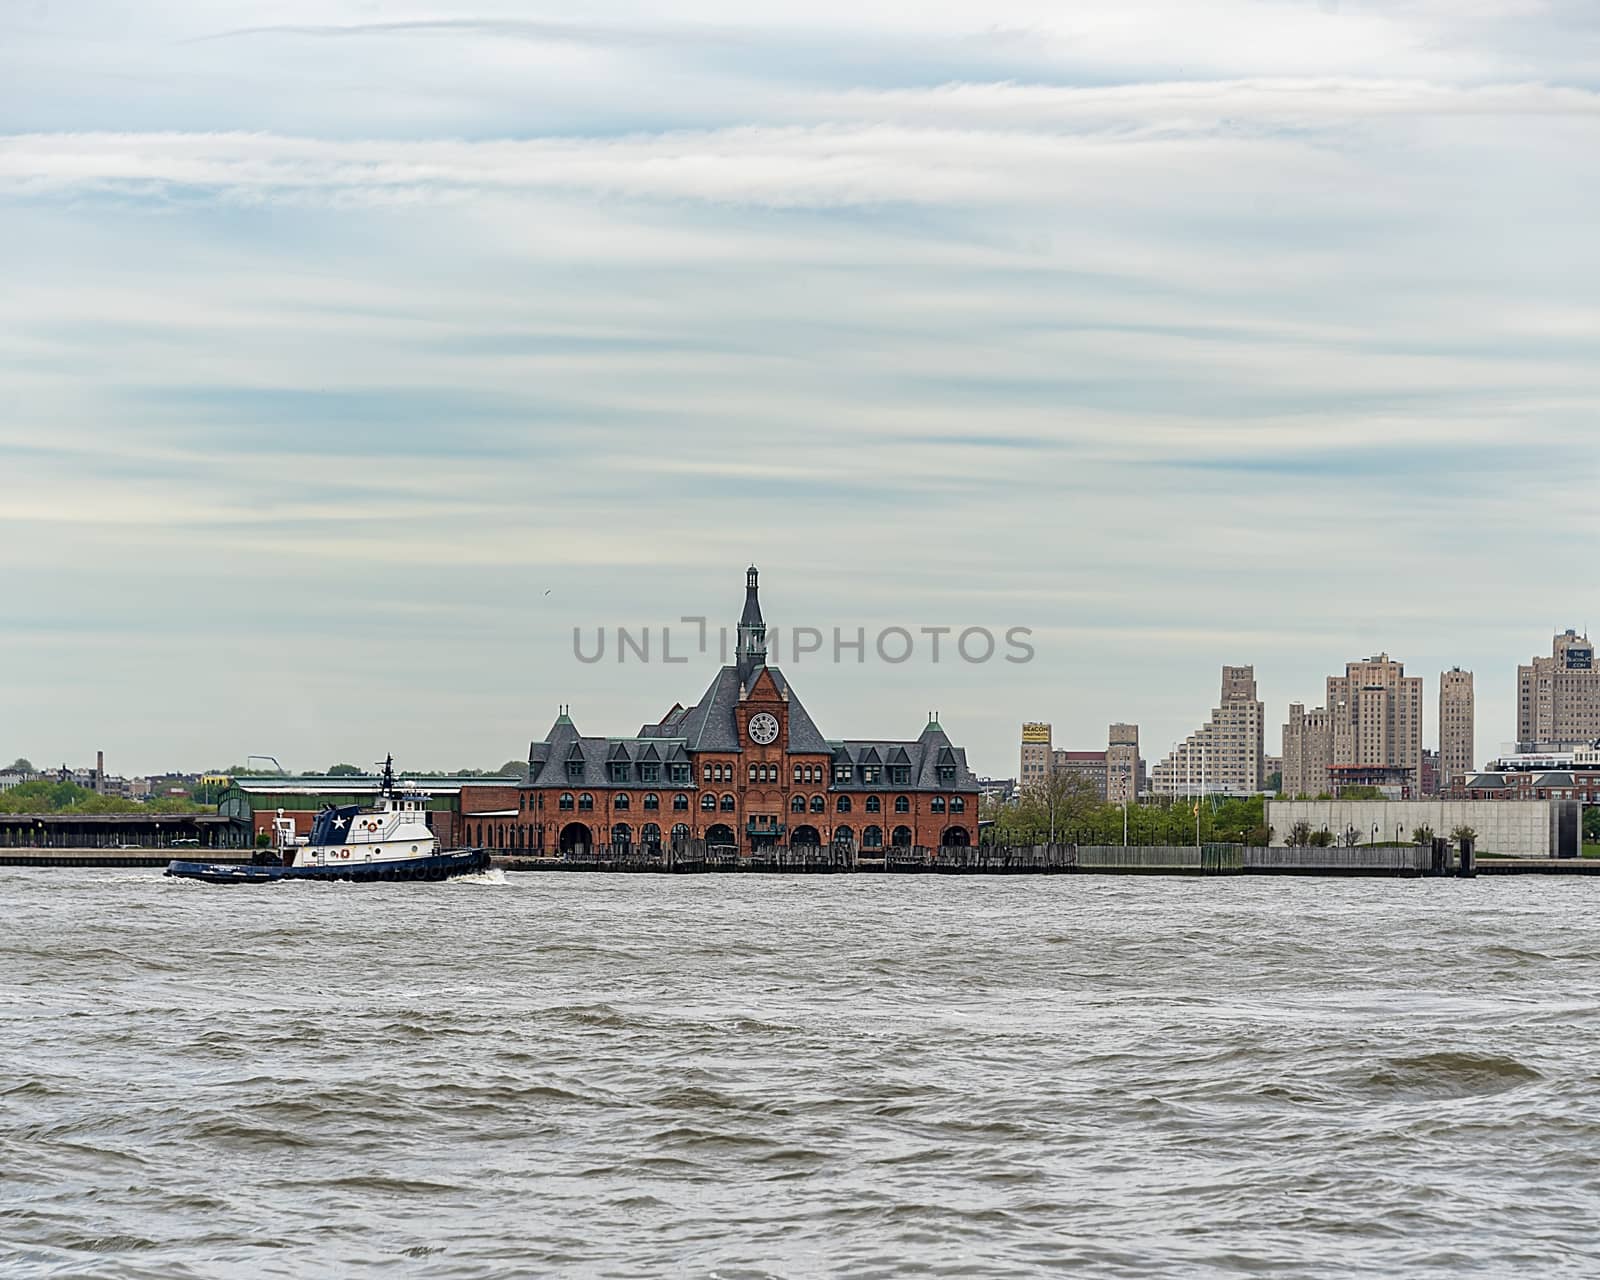 USA, New York - May 2019: Tug boat passing Central Railroad of New Jersey Terminal